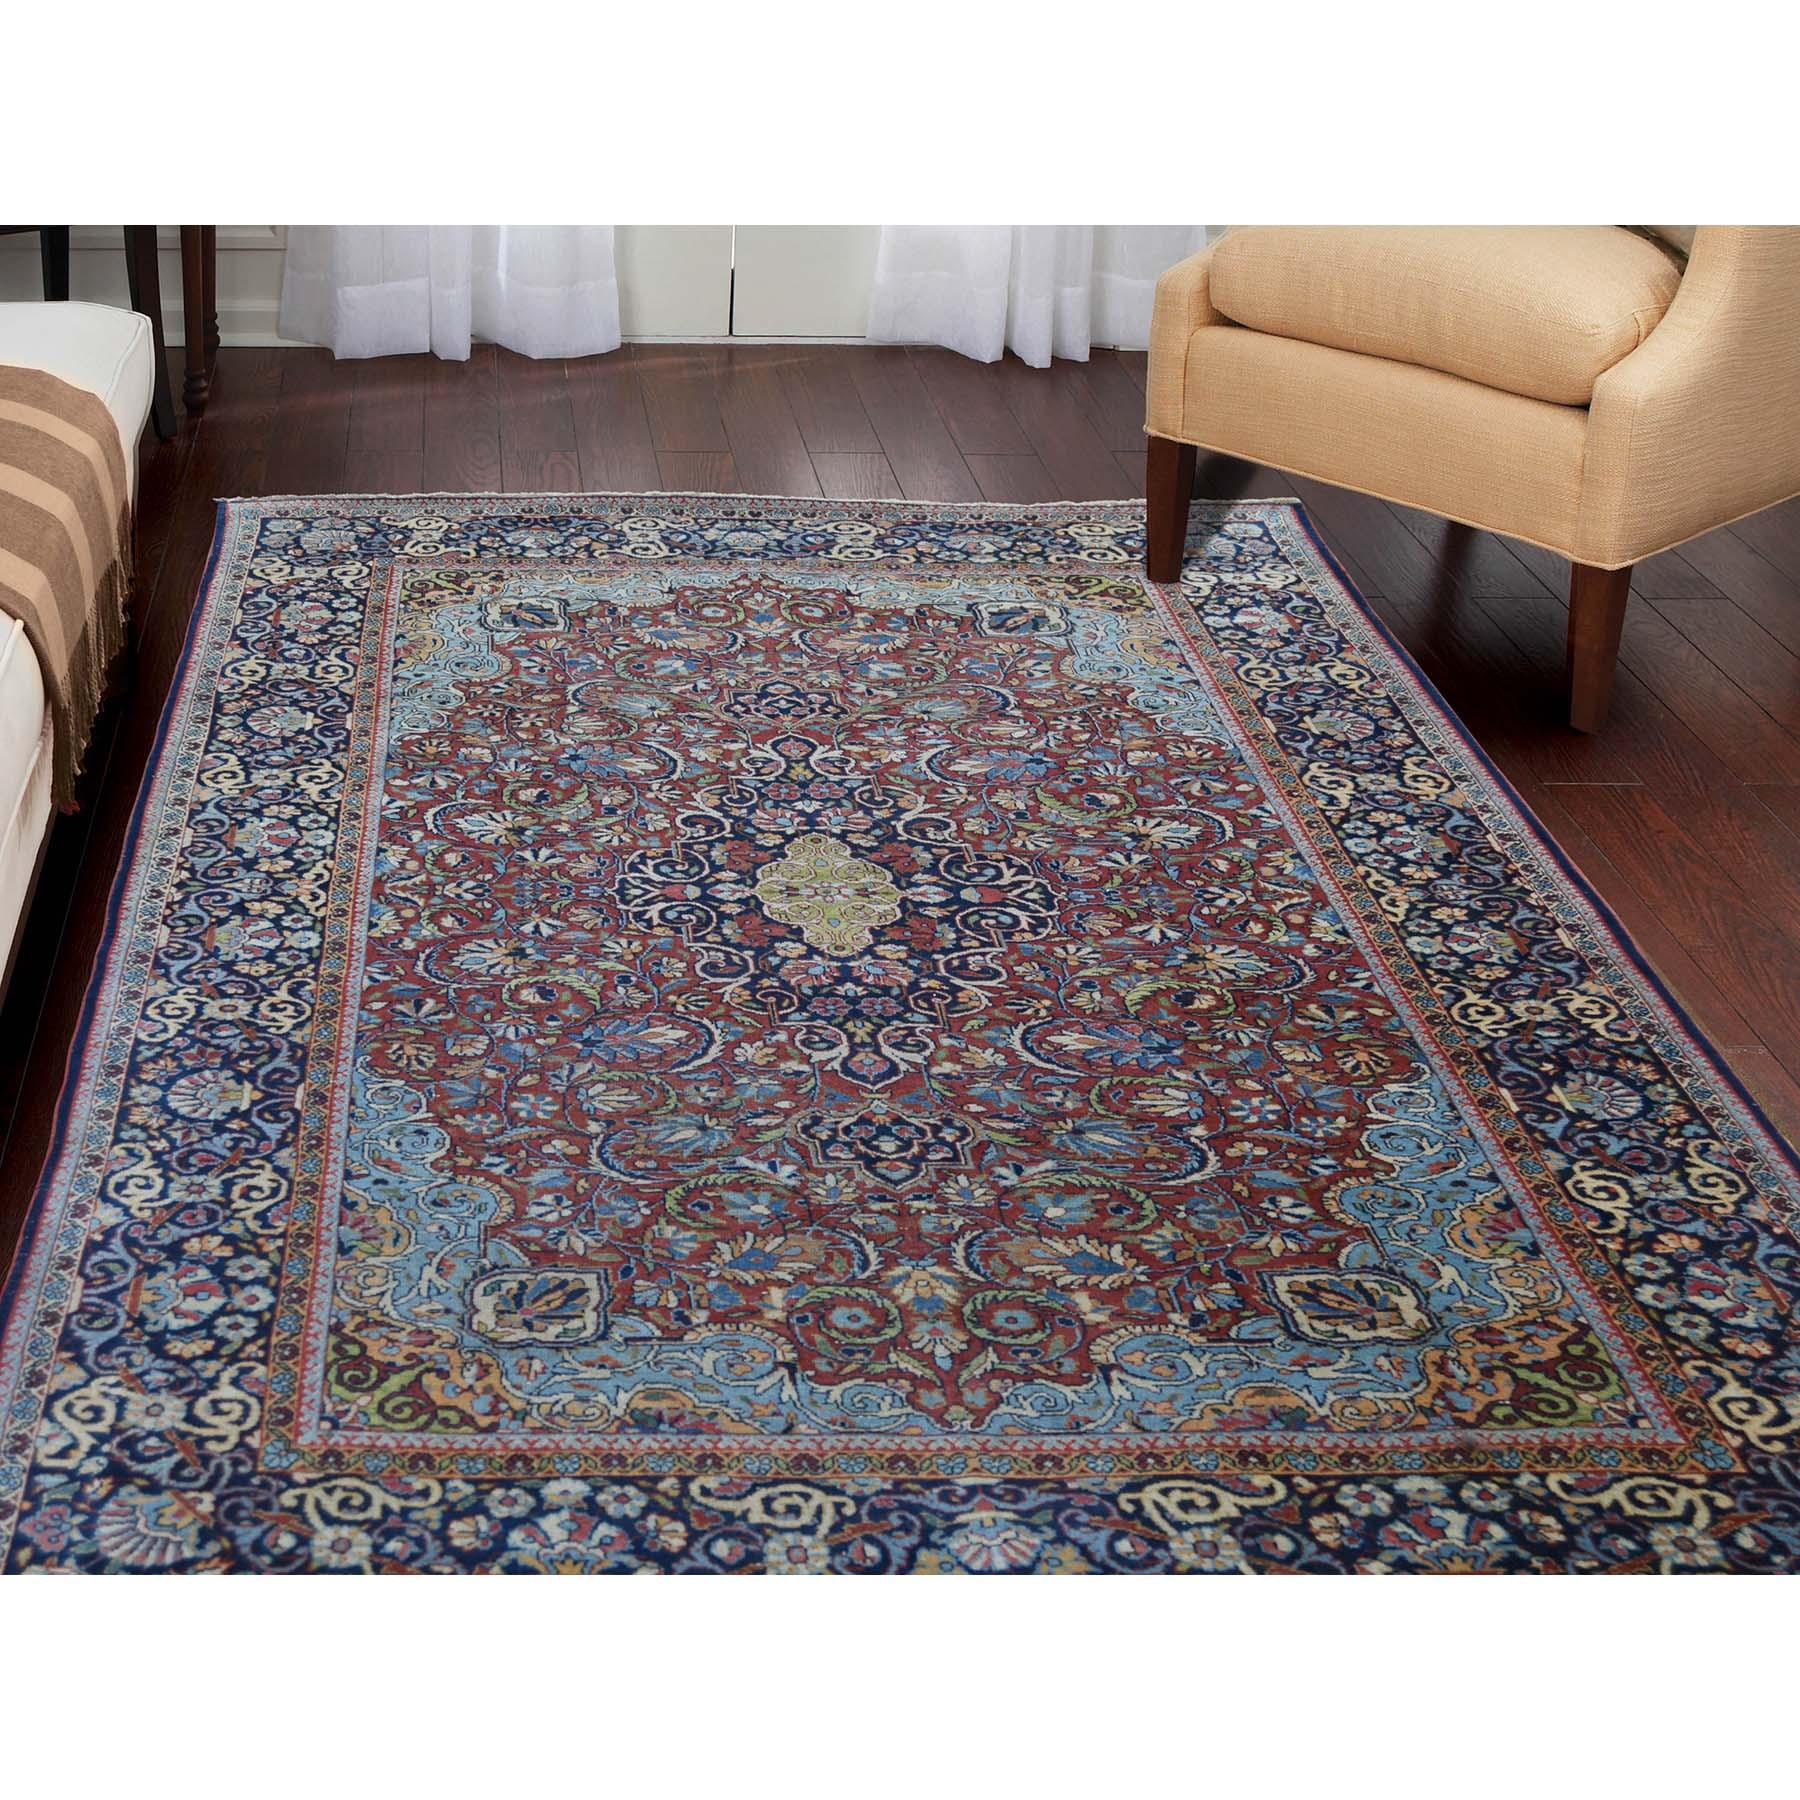 This is a truly genuine one-of-a-kind antique Persian Isfahan good condition pure wool hand-knotted rug. It has been Knotted for months and months in the centuries-old Persian weaving craftsmanship techniques by expert artisans. 


Primary